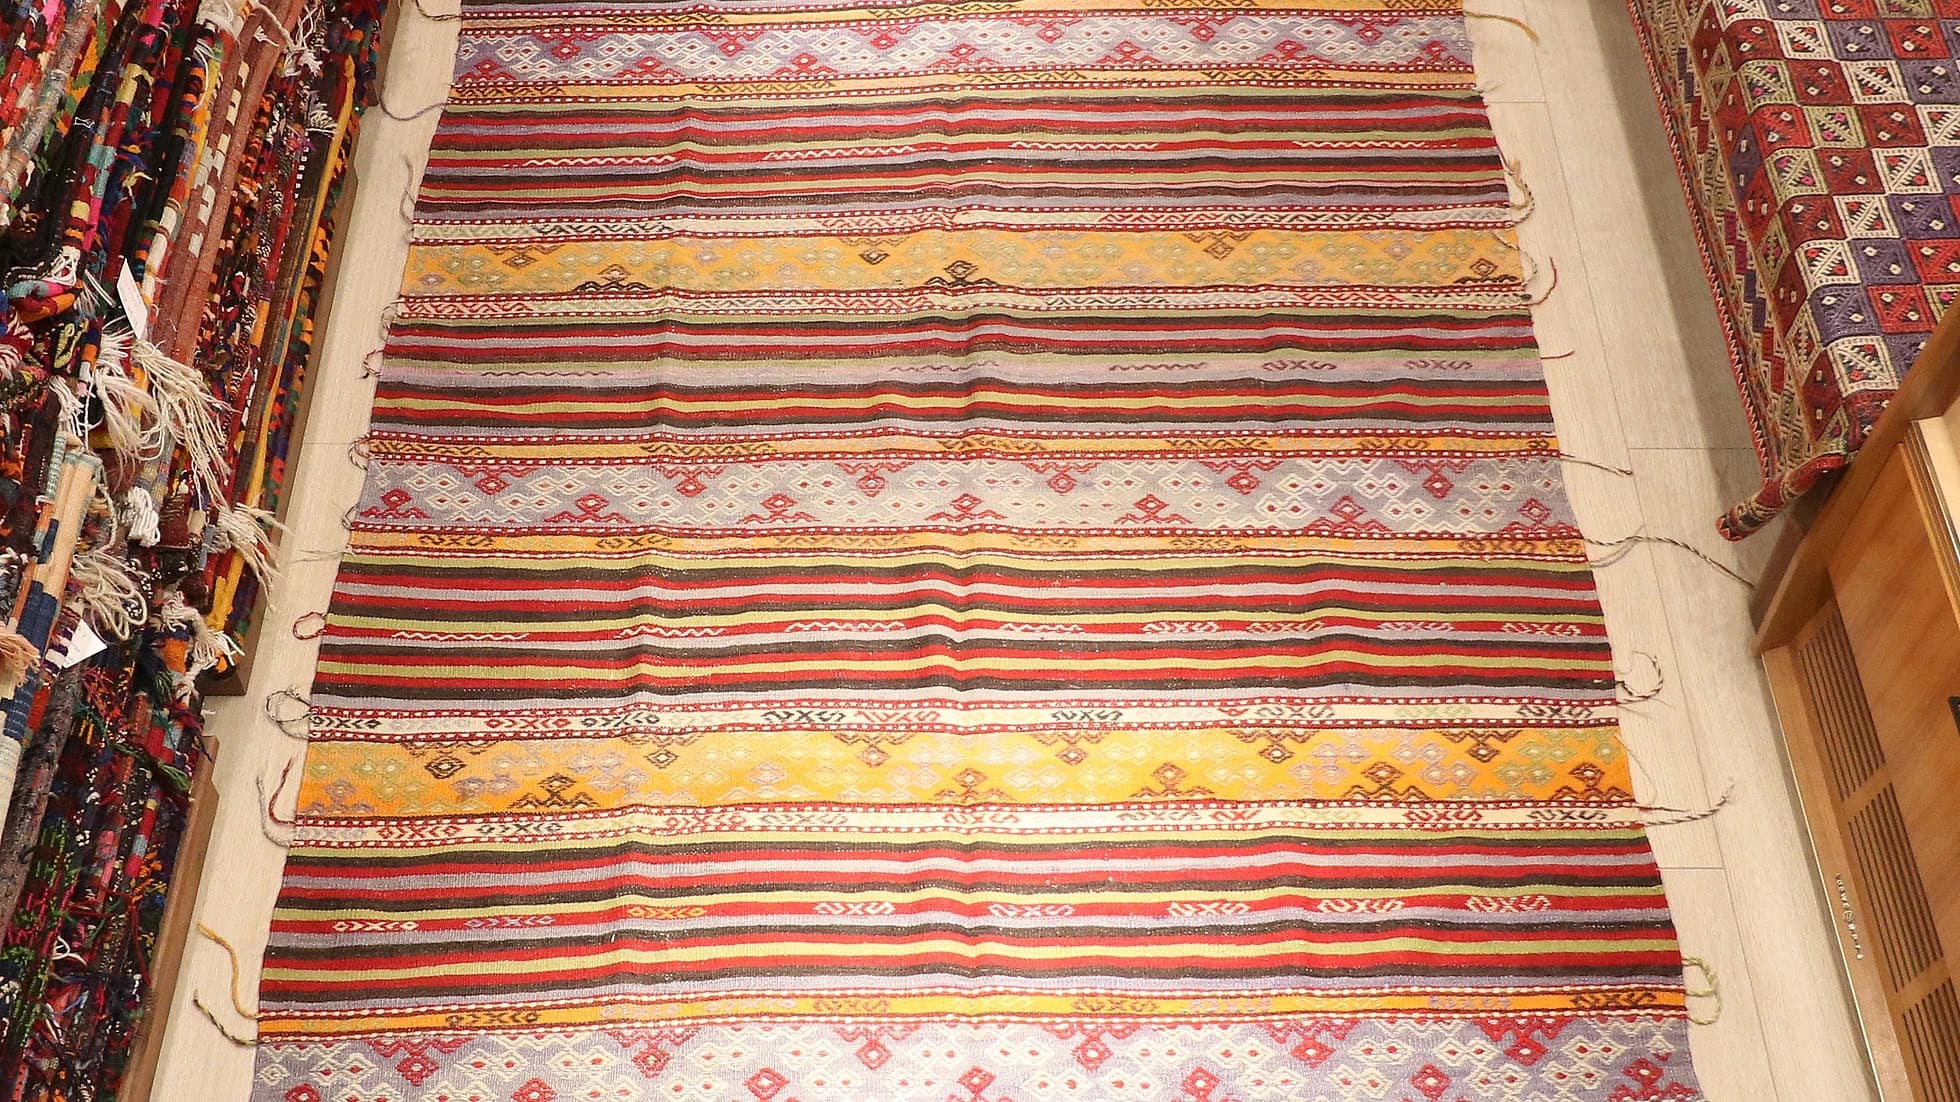 a true authentic and rare mid-century Turkish neutral kilim rug with long tassels in faded and muted pastel hues by Kilim Couture New York rug gallery